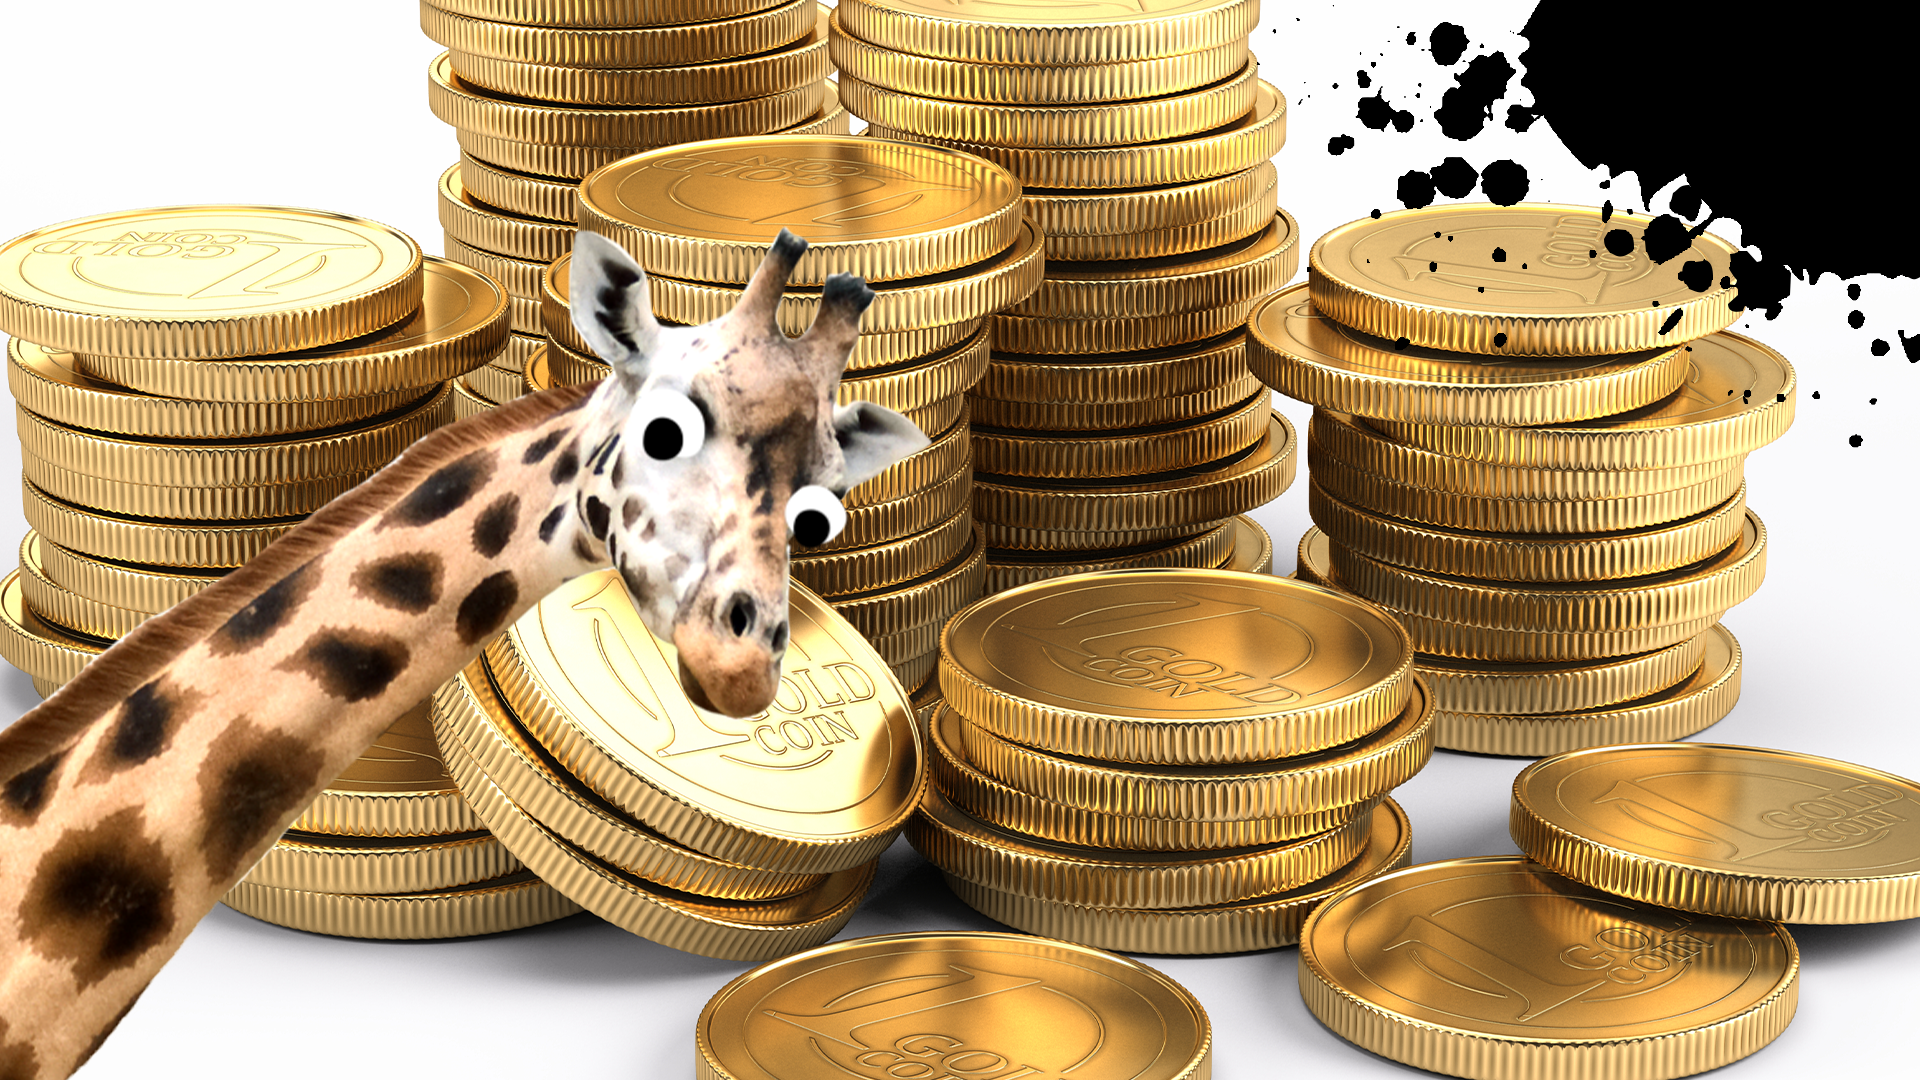 Pile of gold coins with Beano giraffe